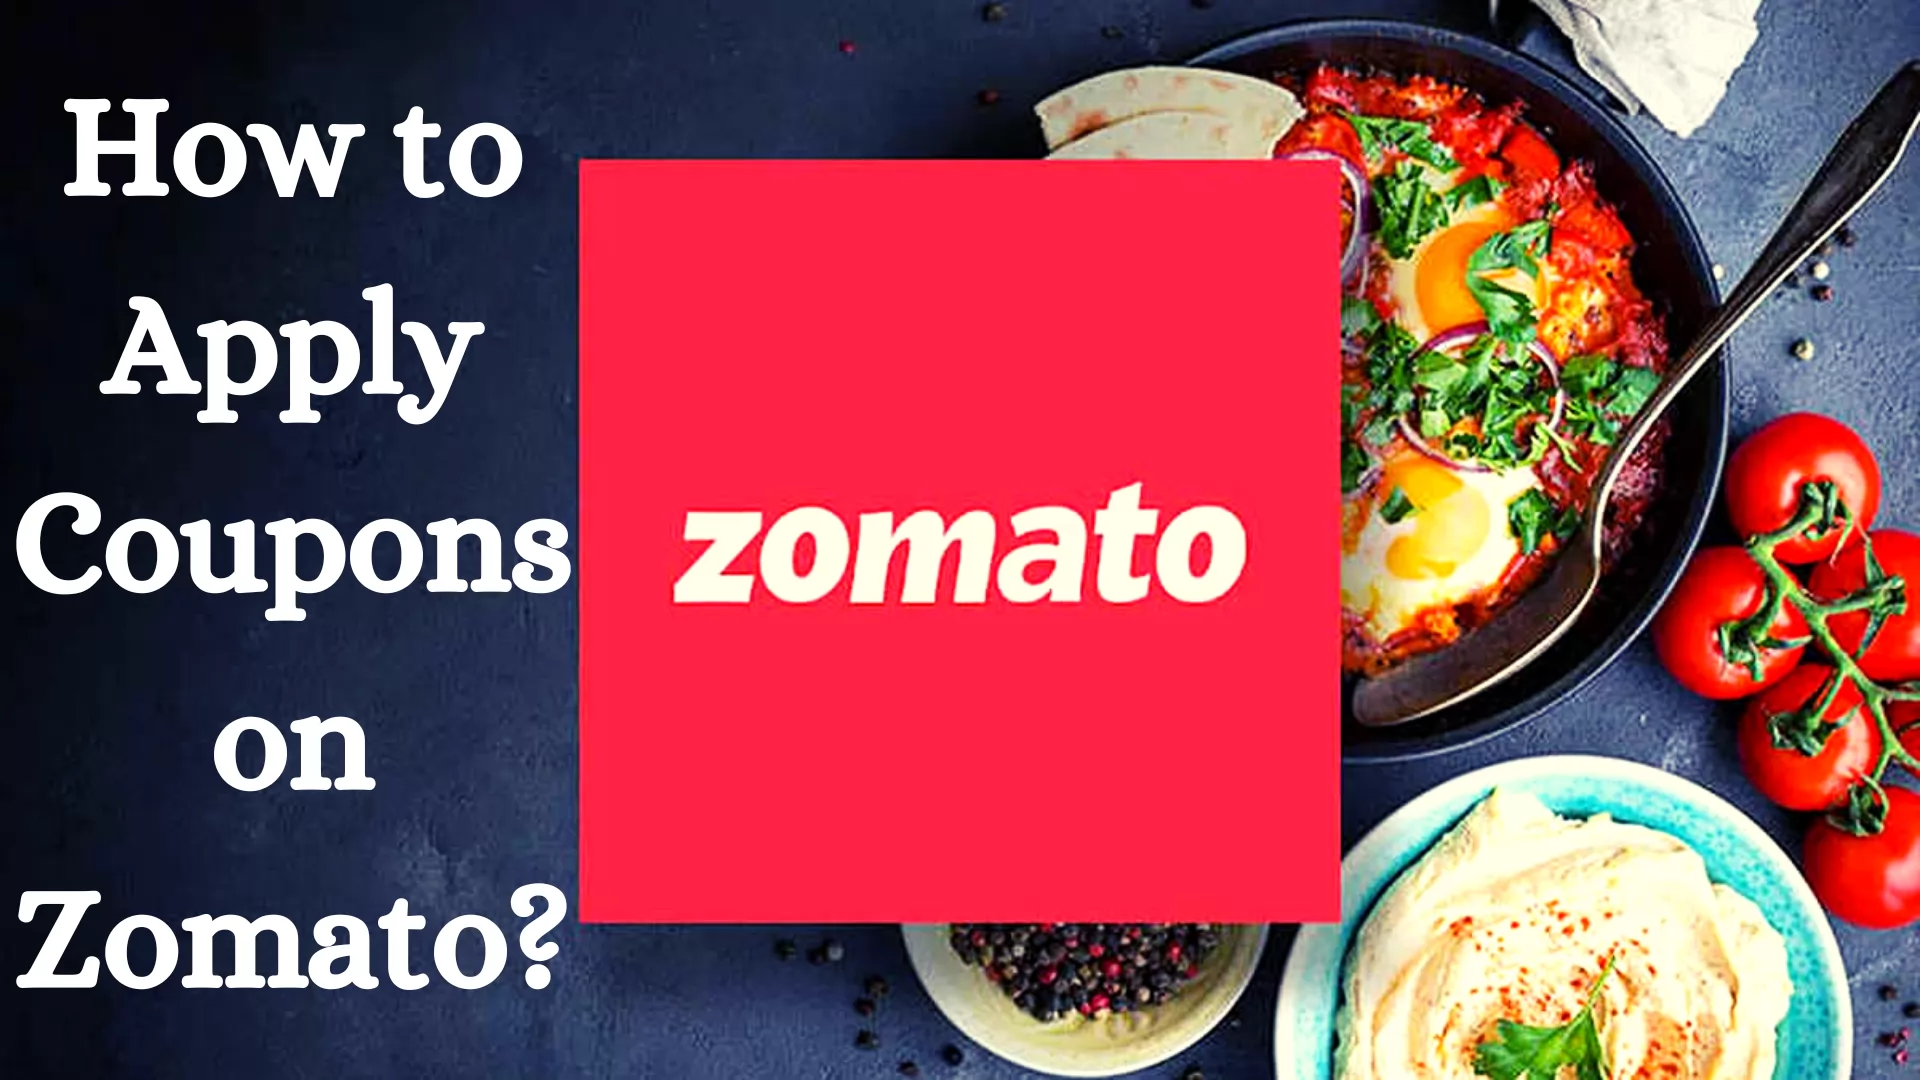 How to Apply Coupons on Zomato?